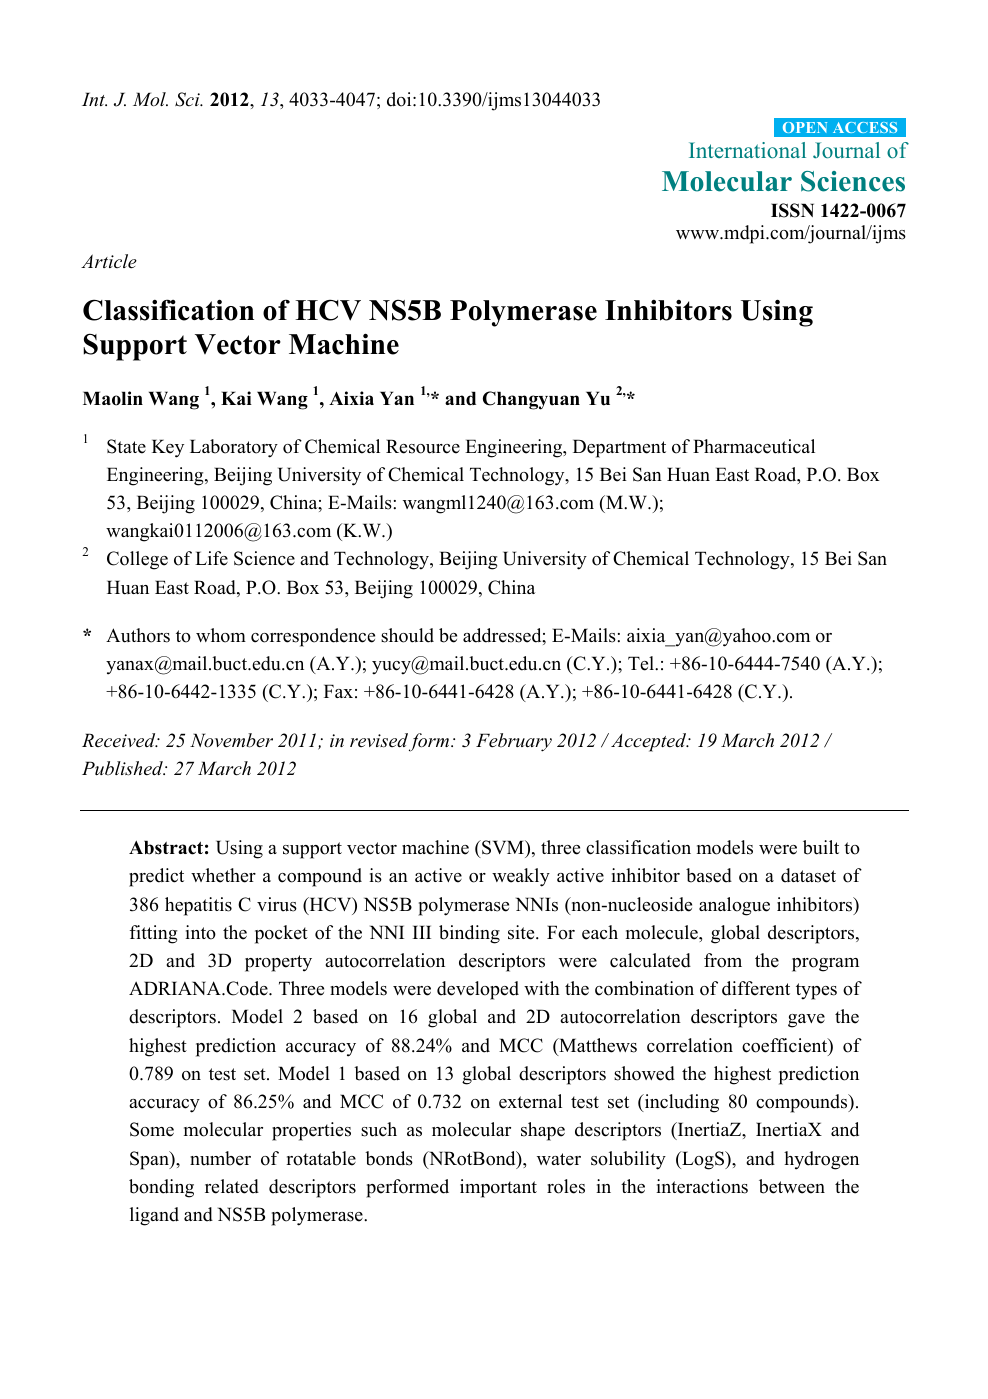 Classification Of Hcv Ns5b Polymerase Inhibitors Using Support Vector Machine Topic Of Research Paper In Chemical Sciences Download Scholarly Article Pdf And Read For Free On Cyberleninka Open Science Hub